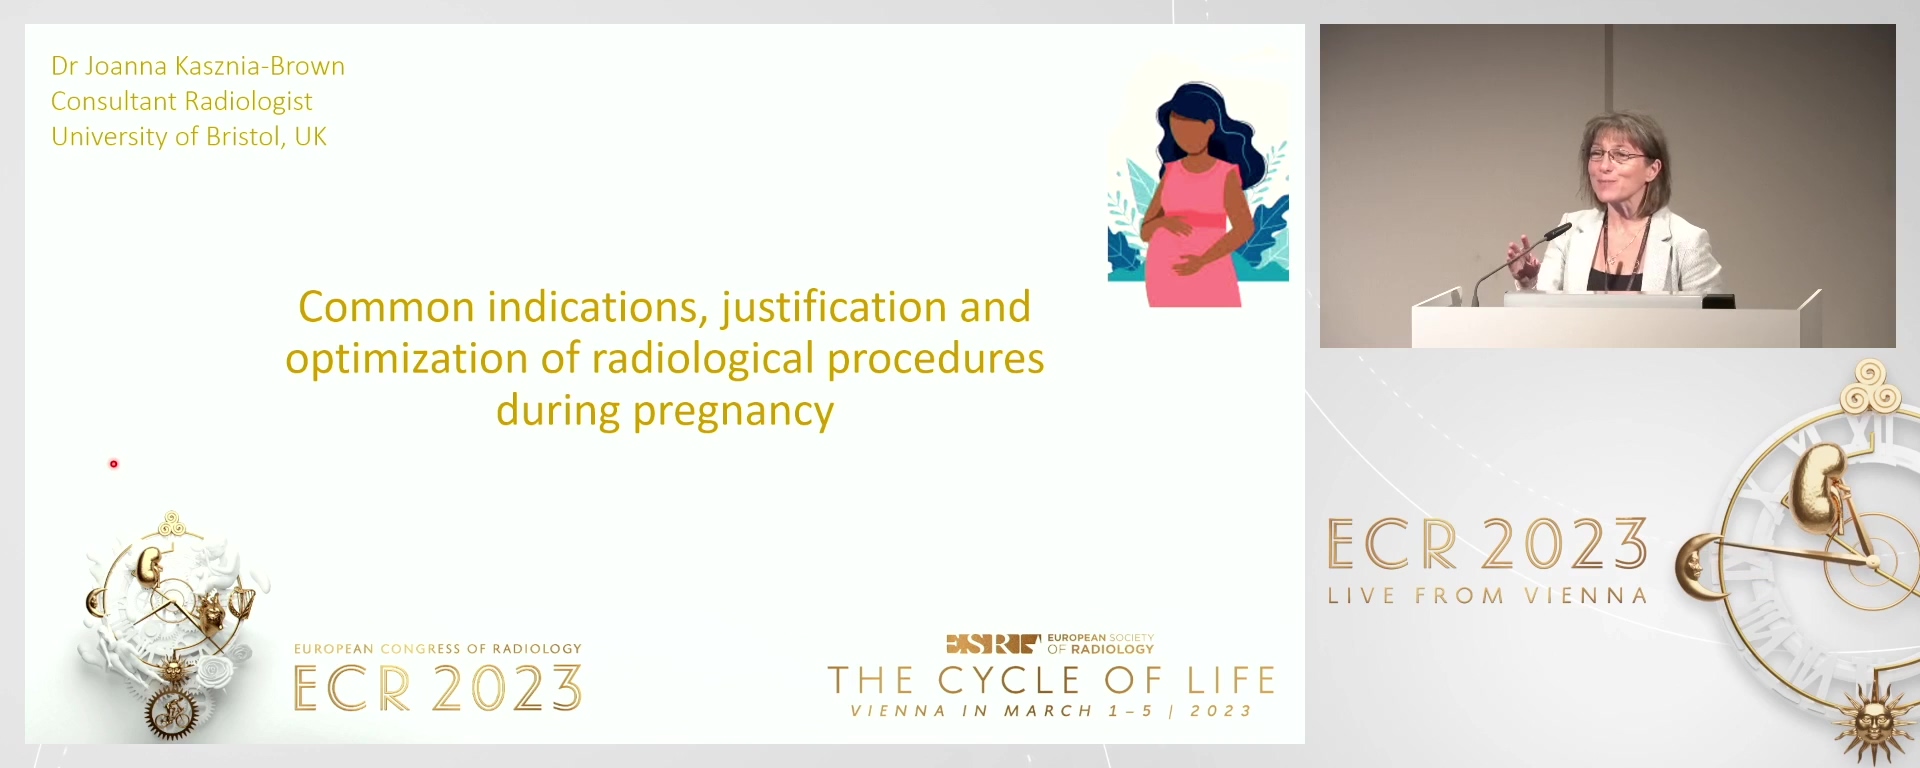 Common indications, justification and optimisation of radiologic procedures during pregnancy